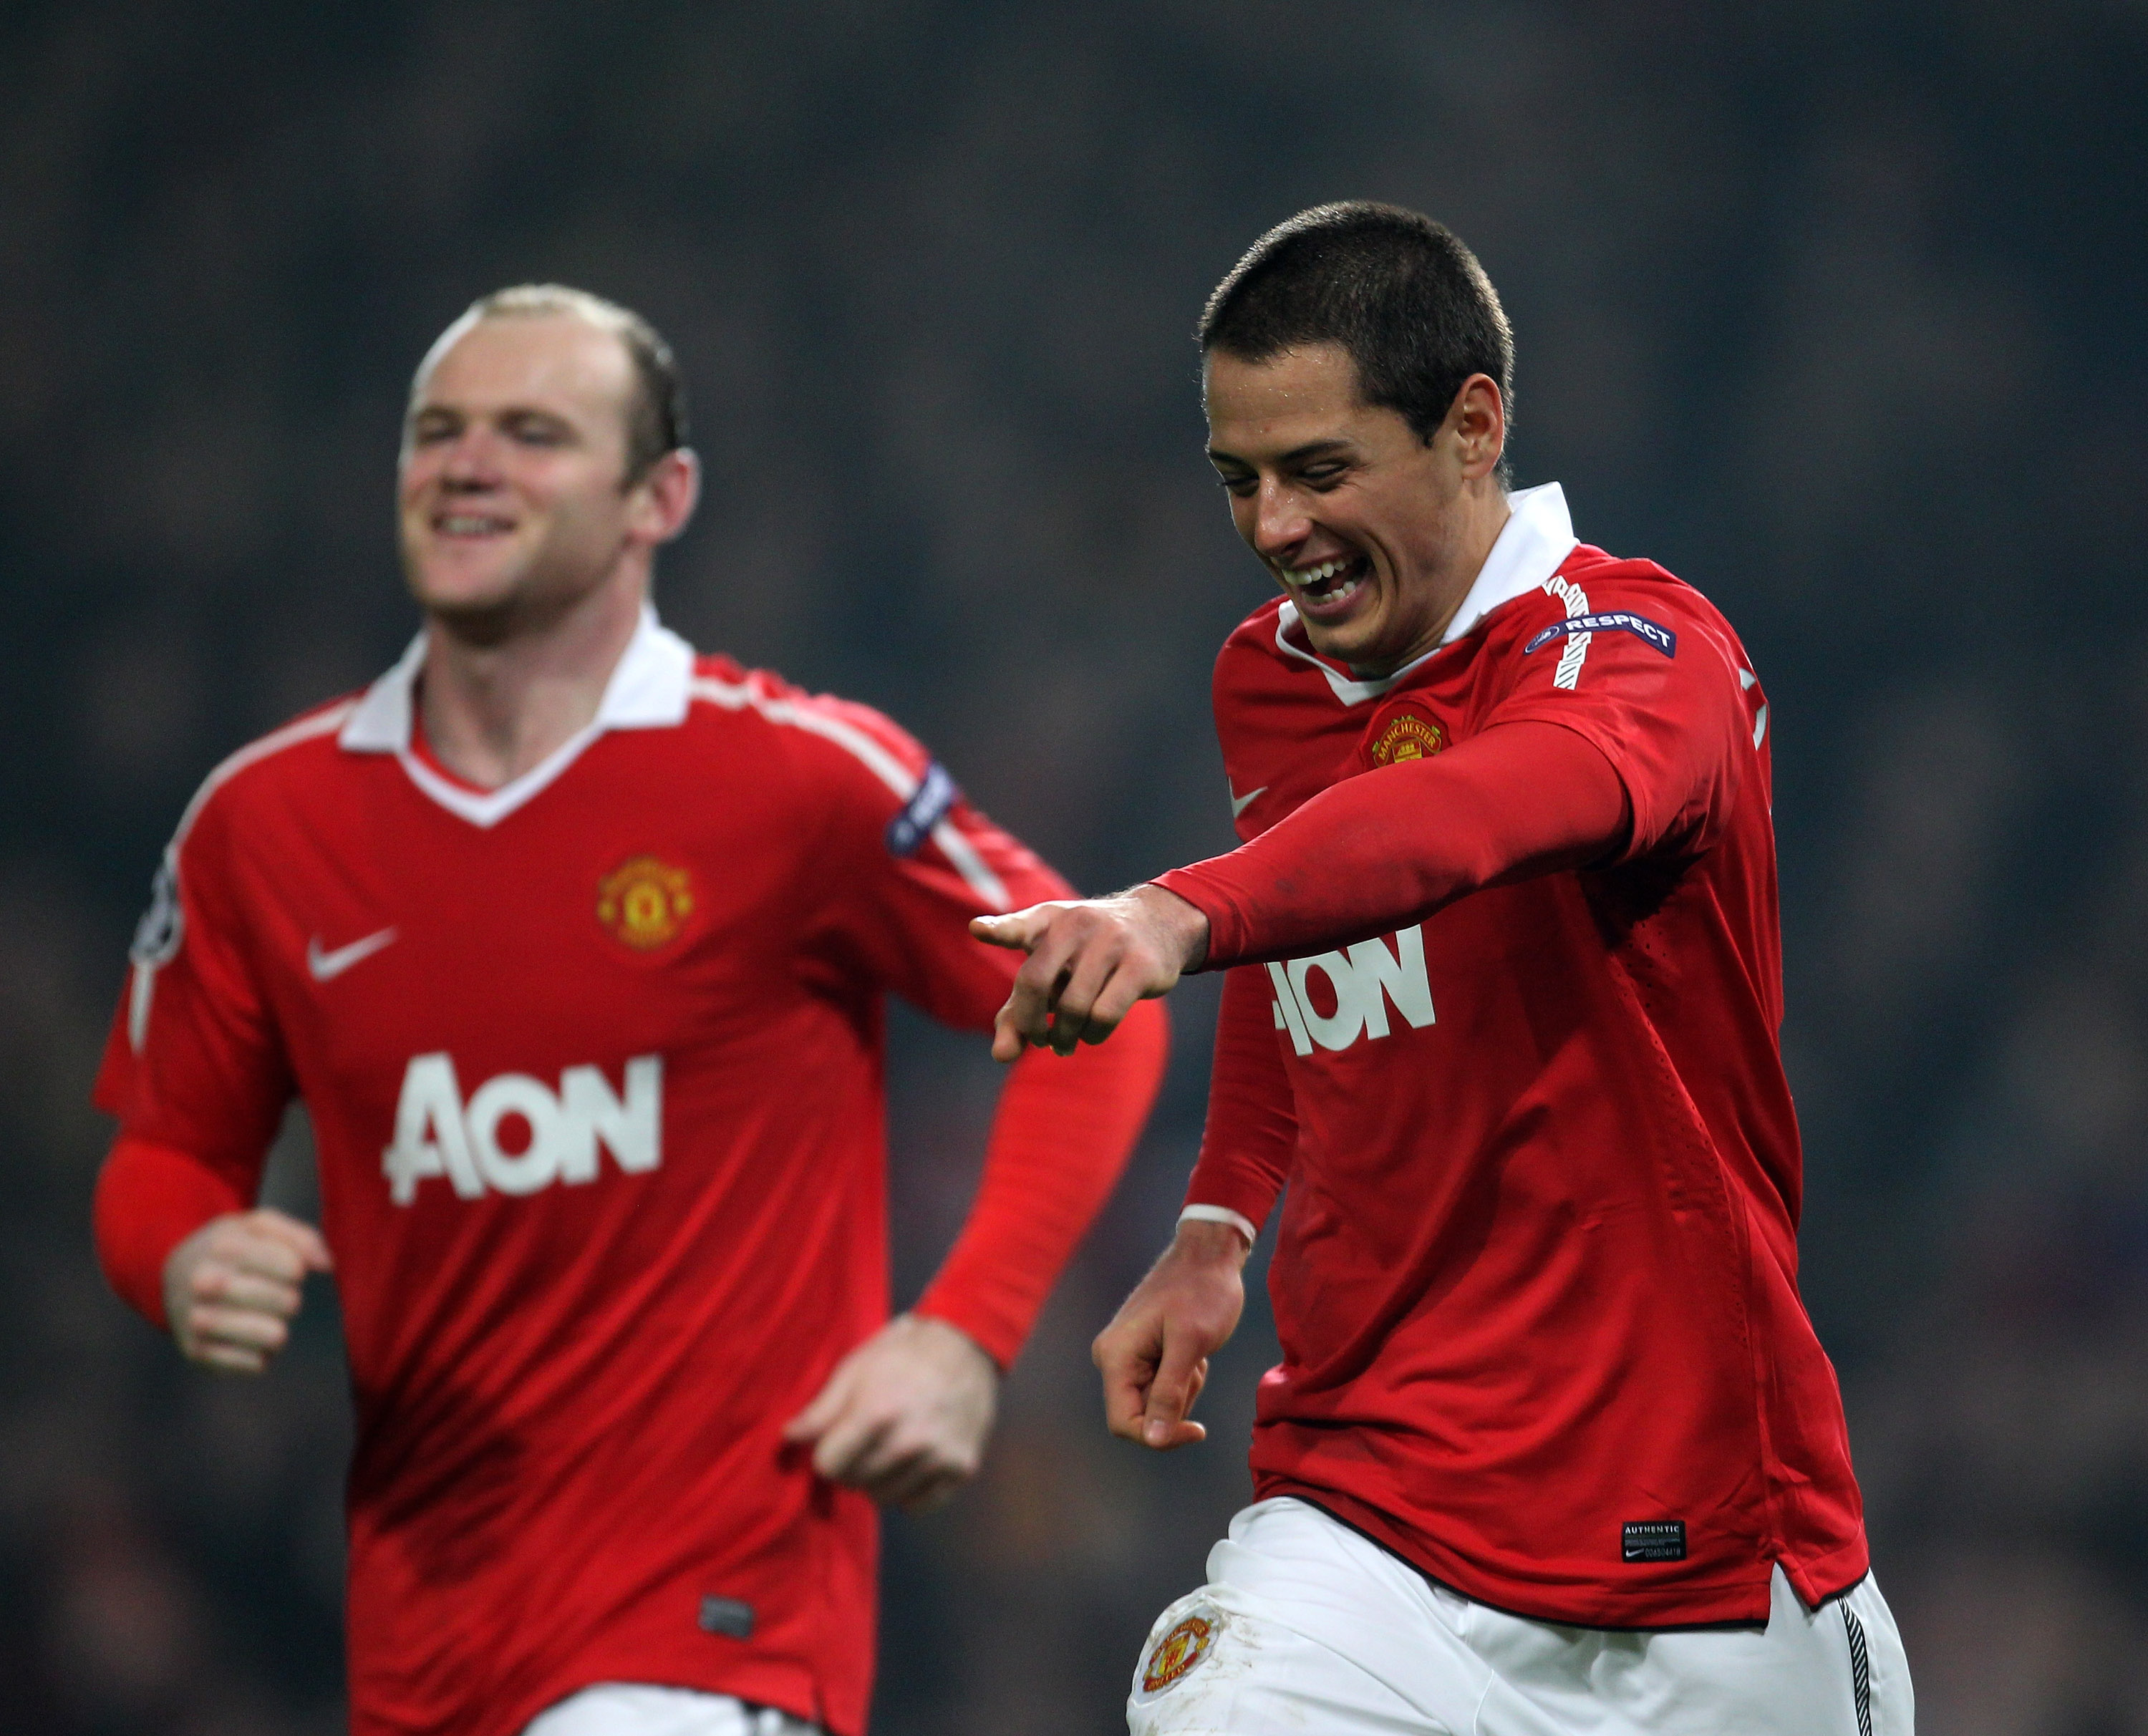 MANCHESTER, ENGLAND - MARCH 15:  Javier Hernandez (R) of Manchester United celebrates with teammate Wayne Rooney (L) as he scores the second goal during the UEFA Champions League round of 16 second leg match between Manchester United and Marseille at Old